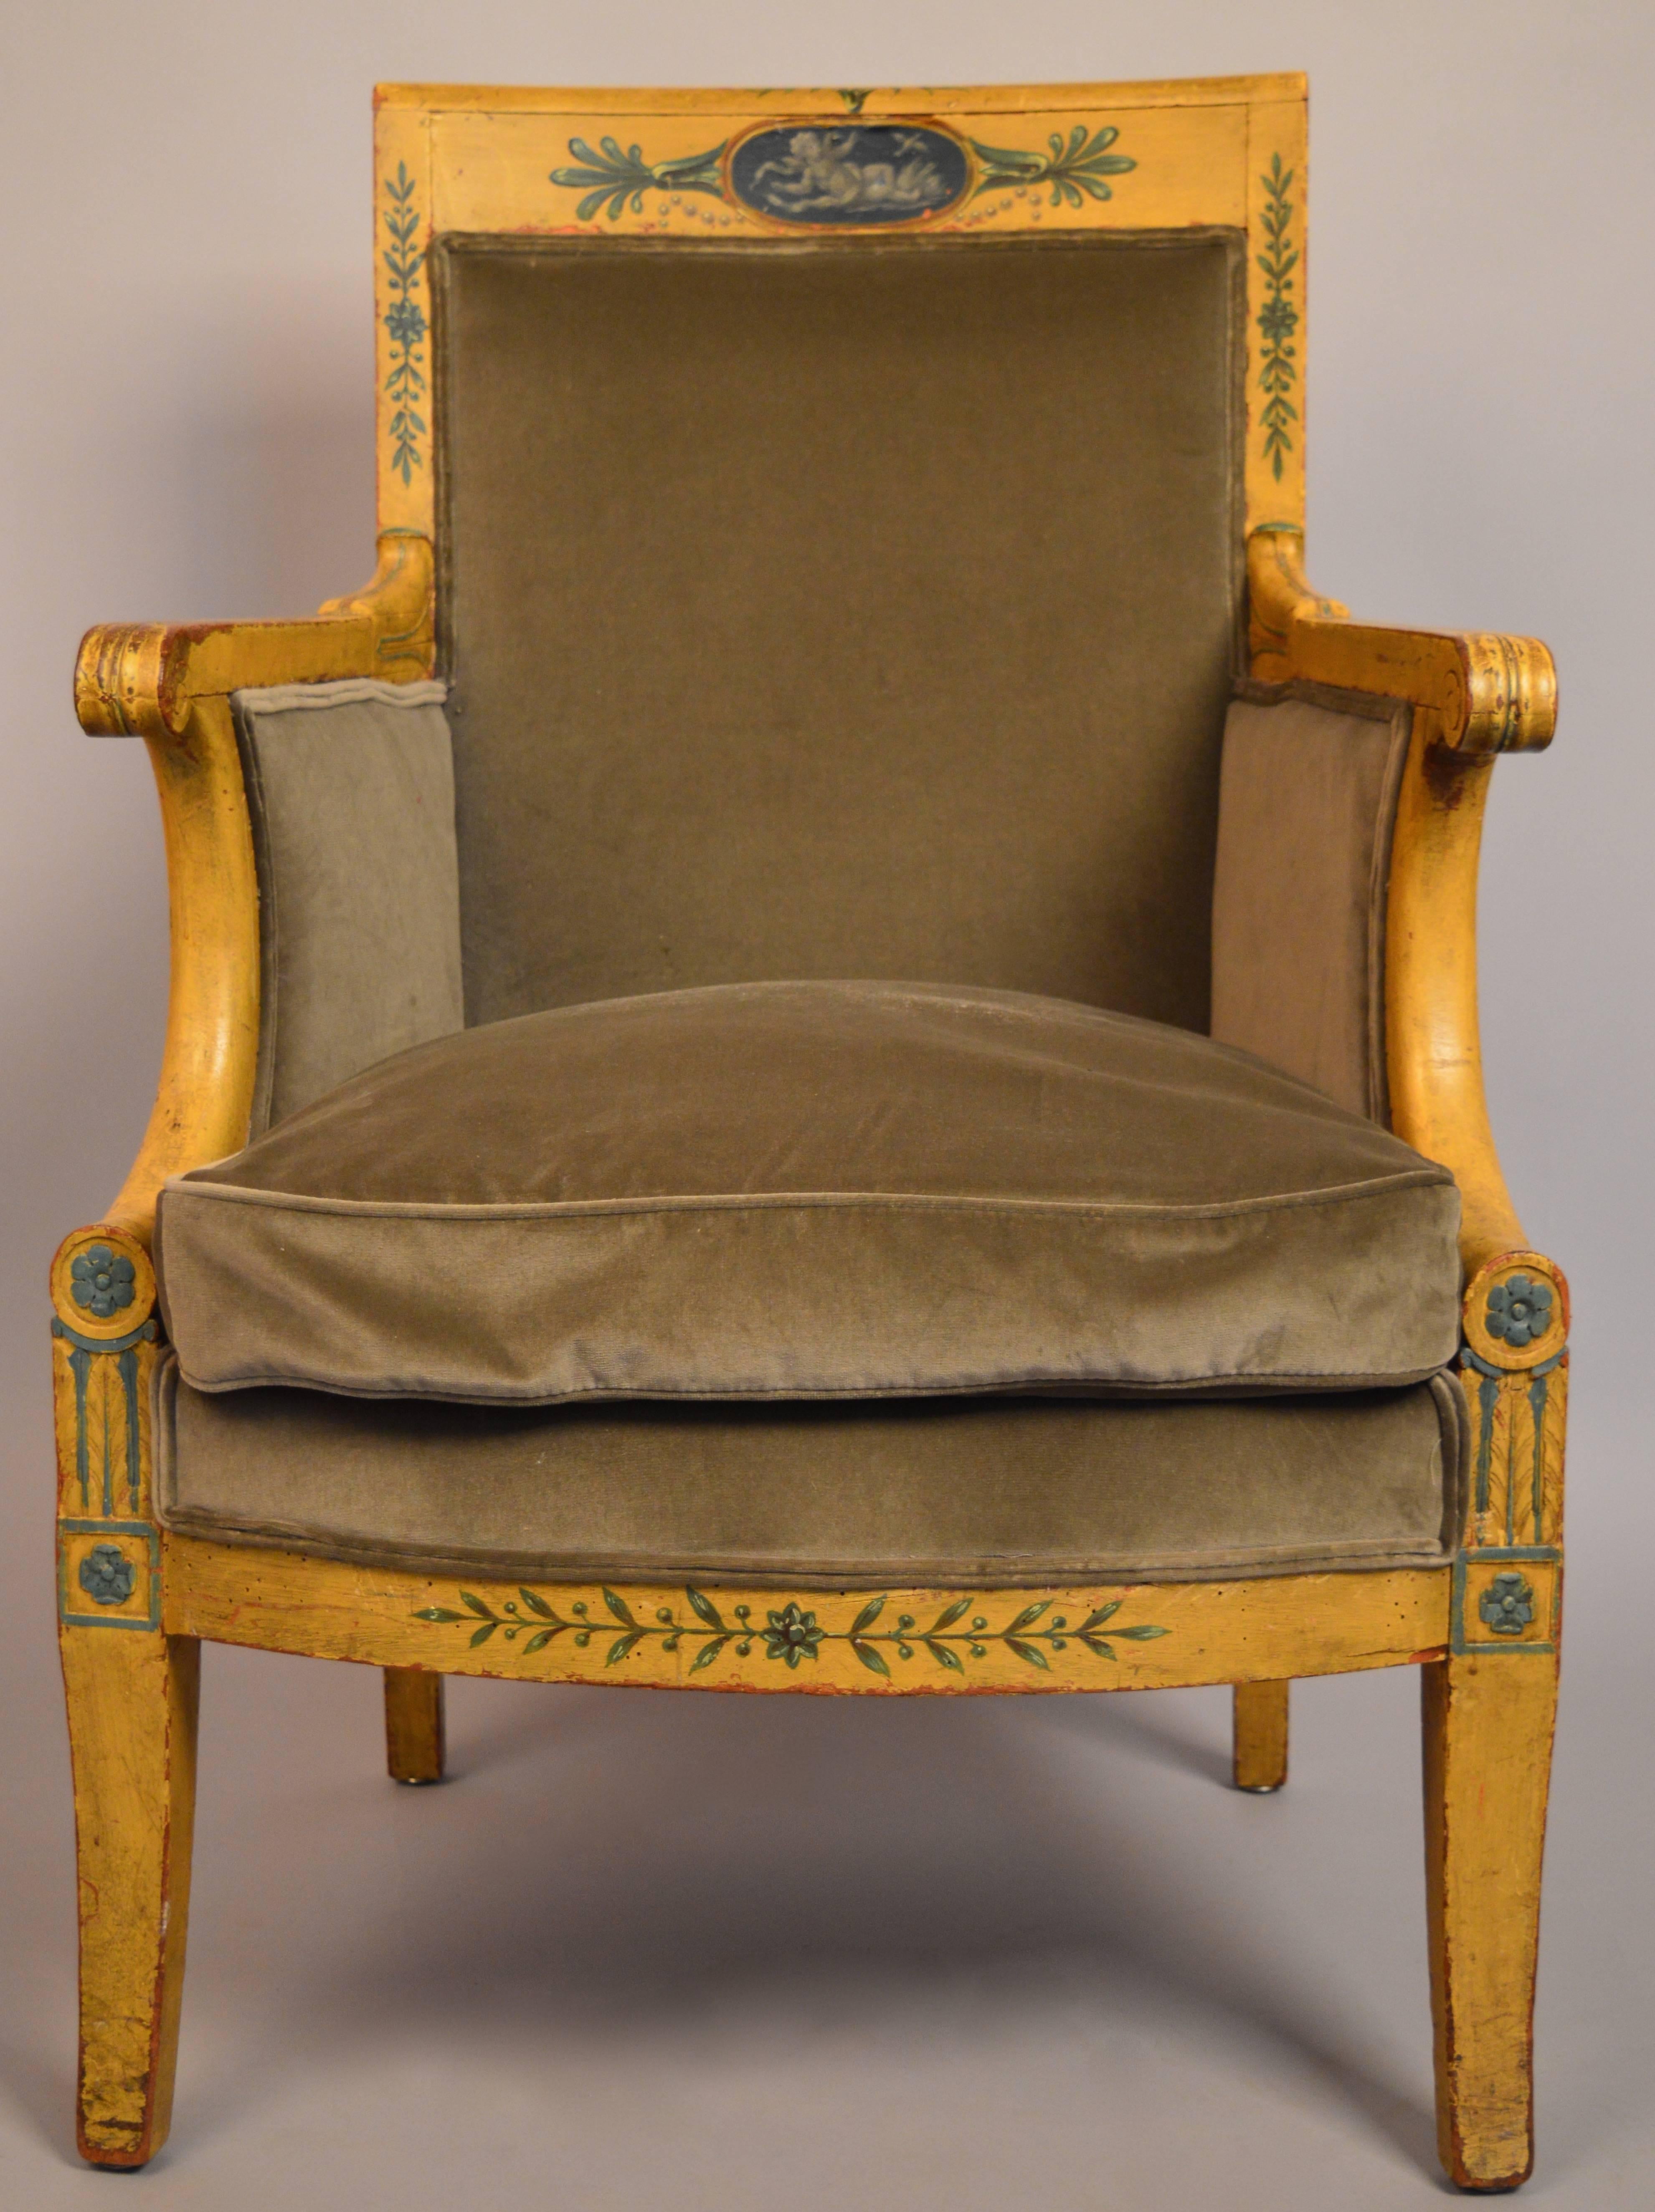 An early 19th century Austrian bergere retaining the original paint. The painted cartouche with a chain of pearls is especially elegant and detailed.
The chair has been reupholstered with Dutch cotton velvet and a down cushion.